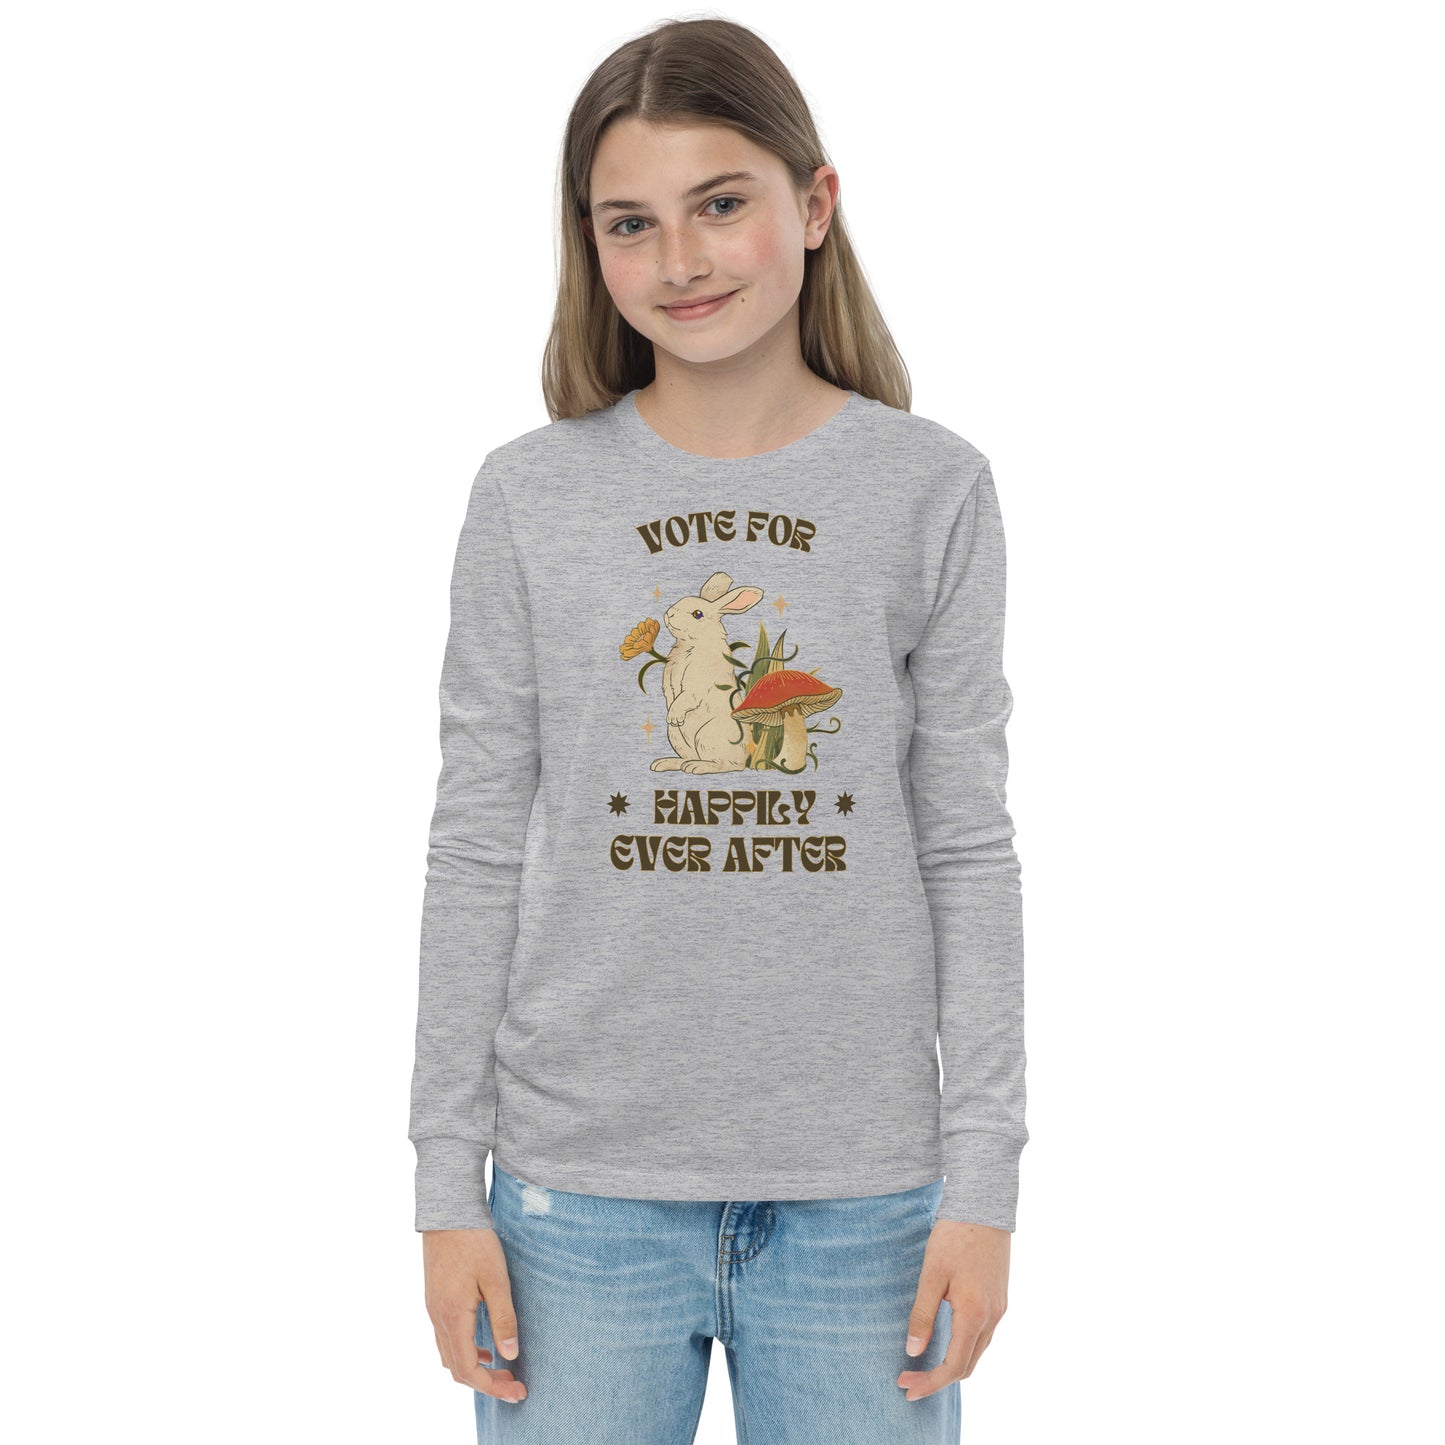 Vote for Happily Ever After Environmental Statement Collection - Youth long sleeve tee